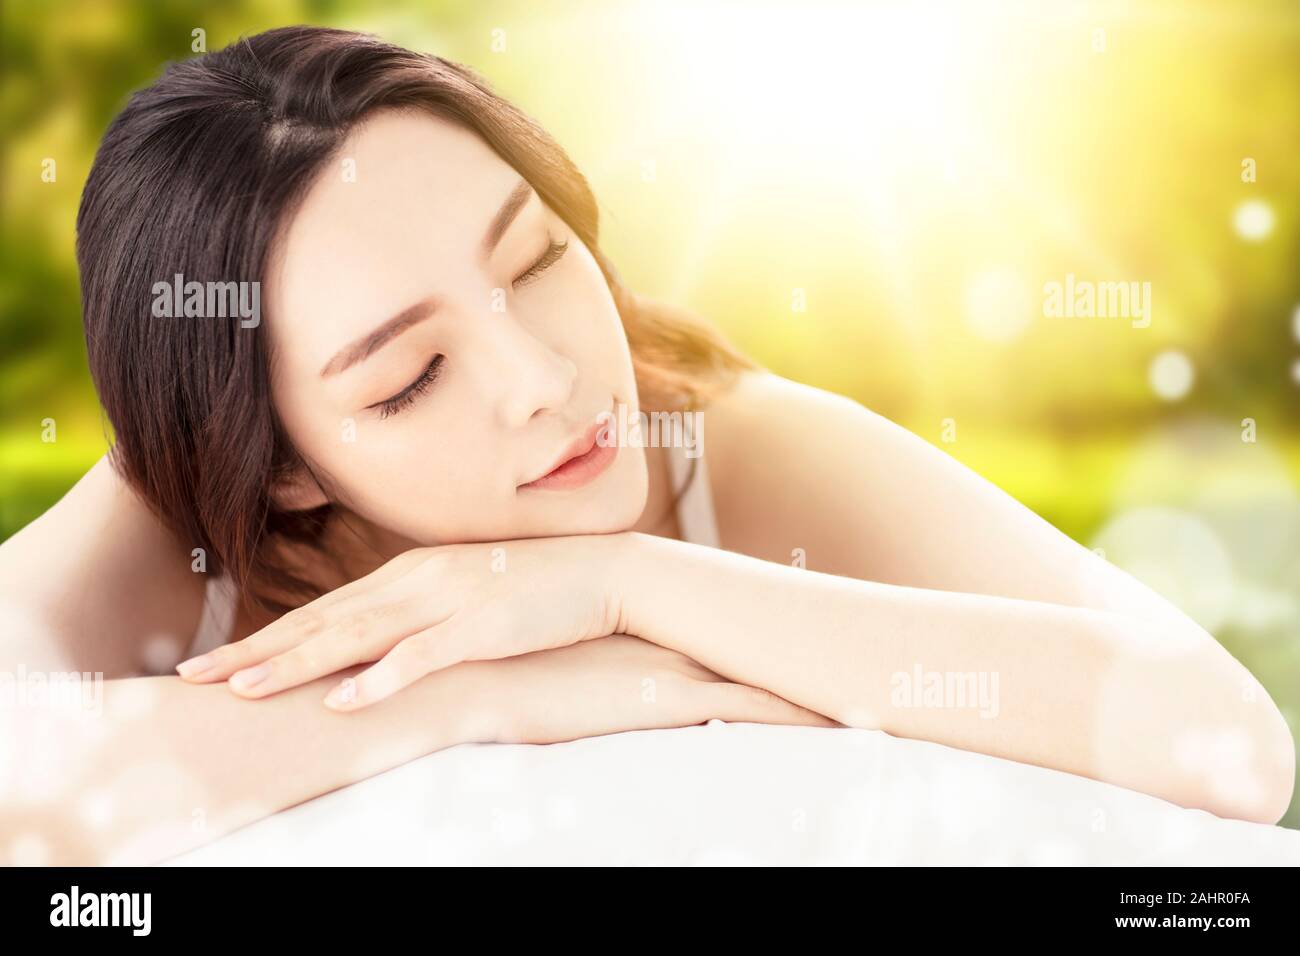 closeup young beauty with healthy perfect skin Stock Photo